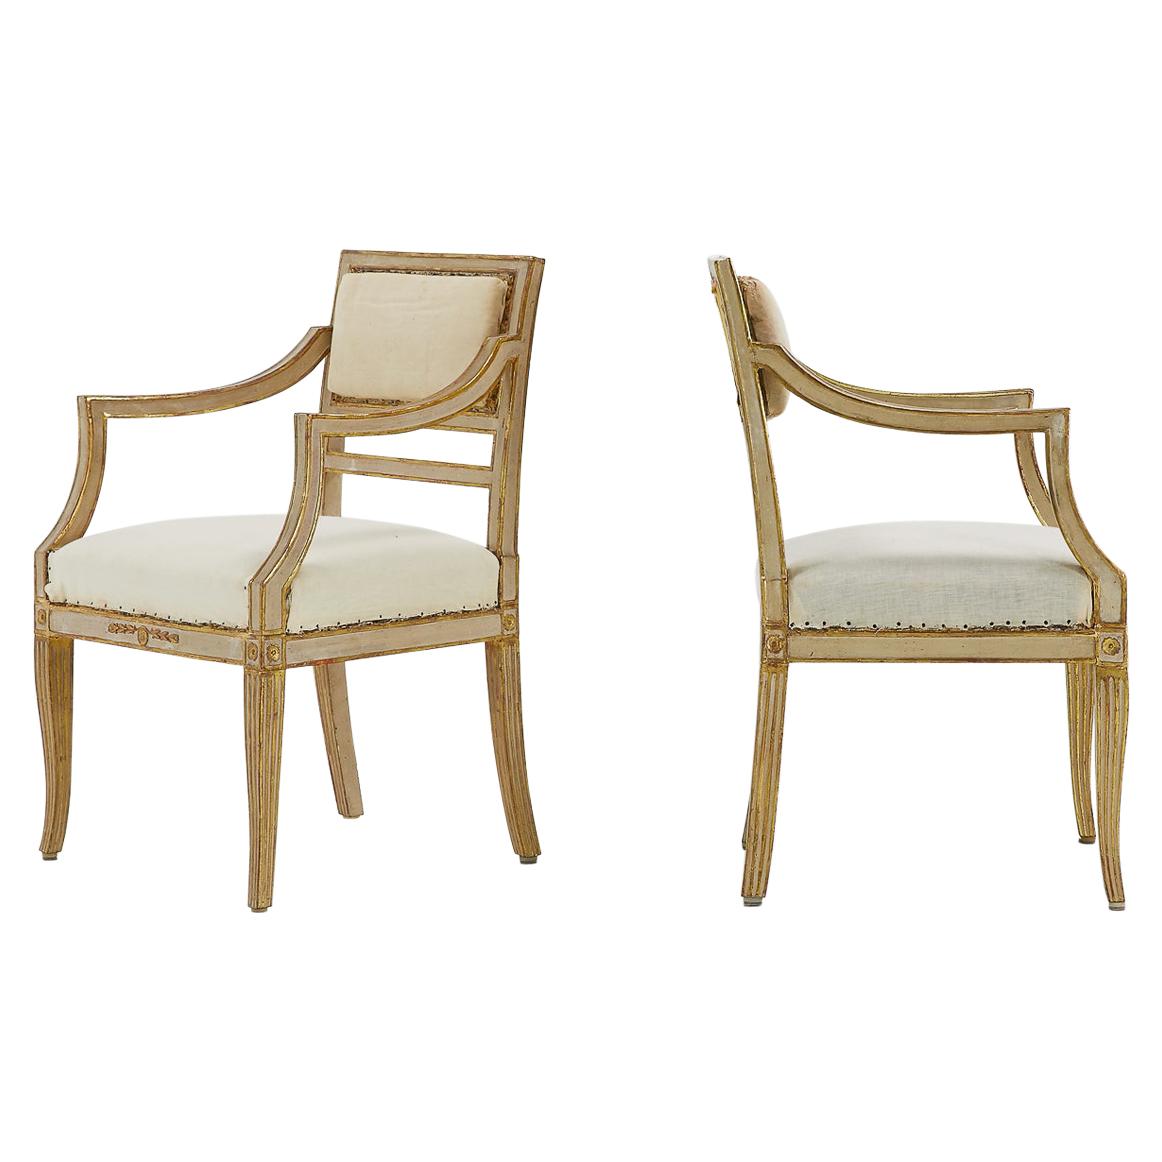 Pair of Small Italian Gilt and Paint Chairs